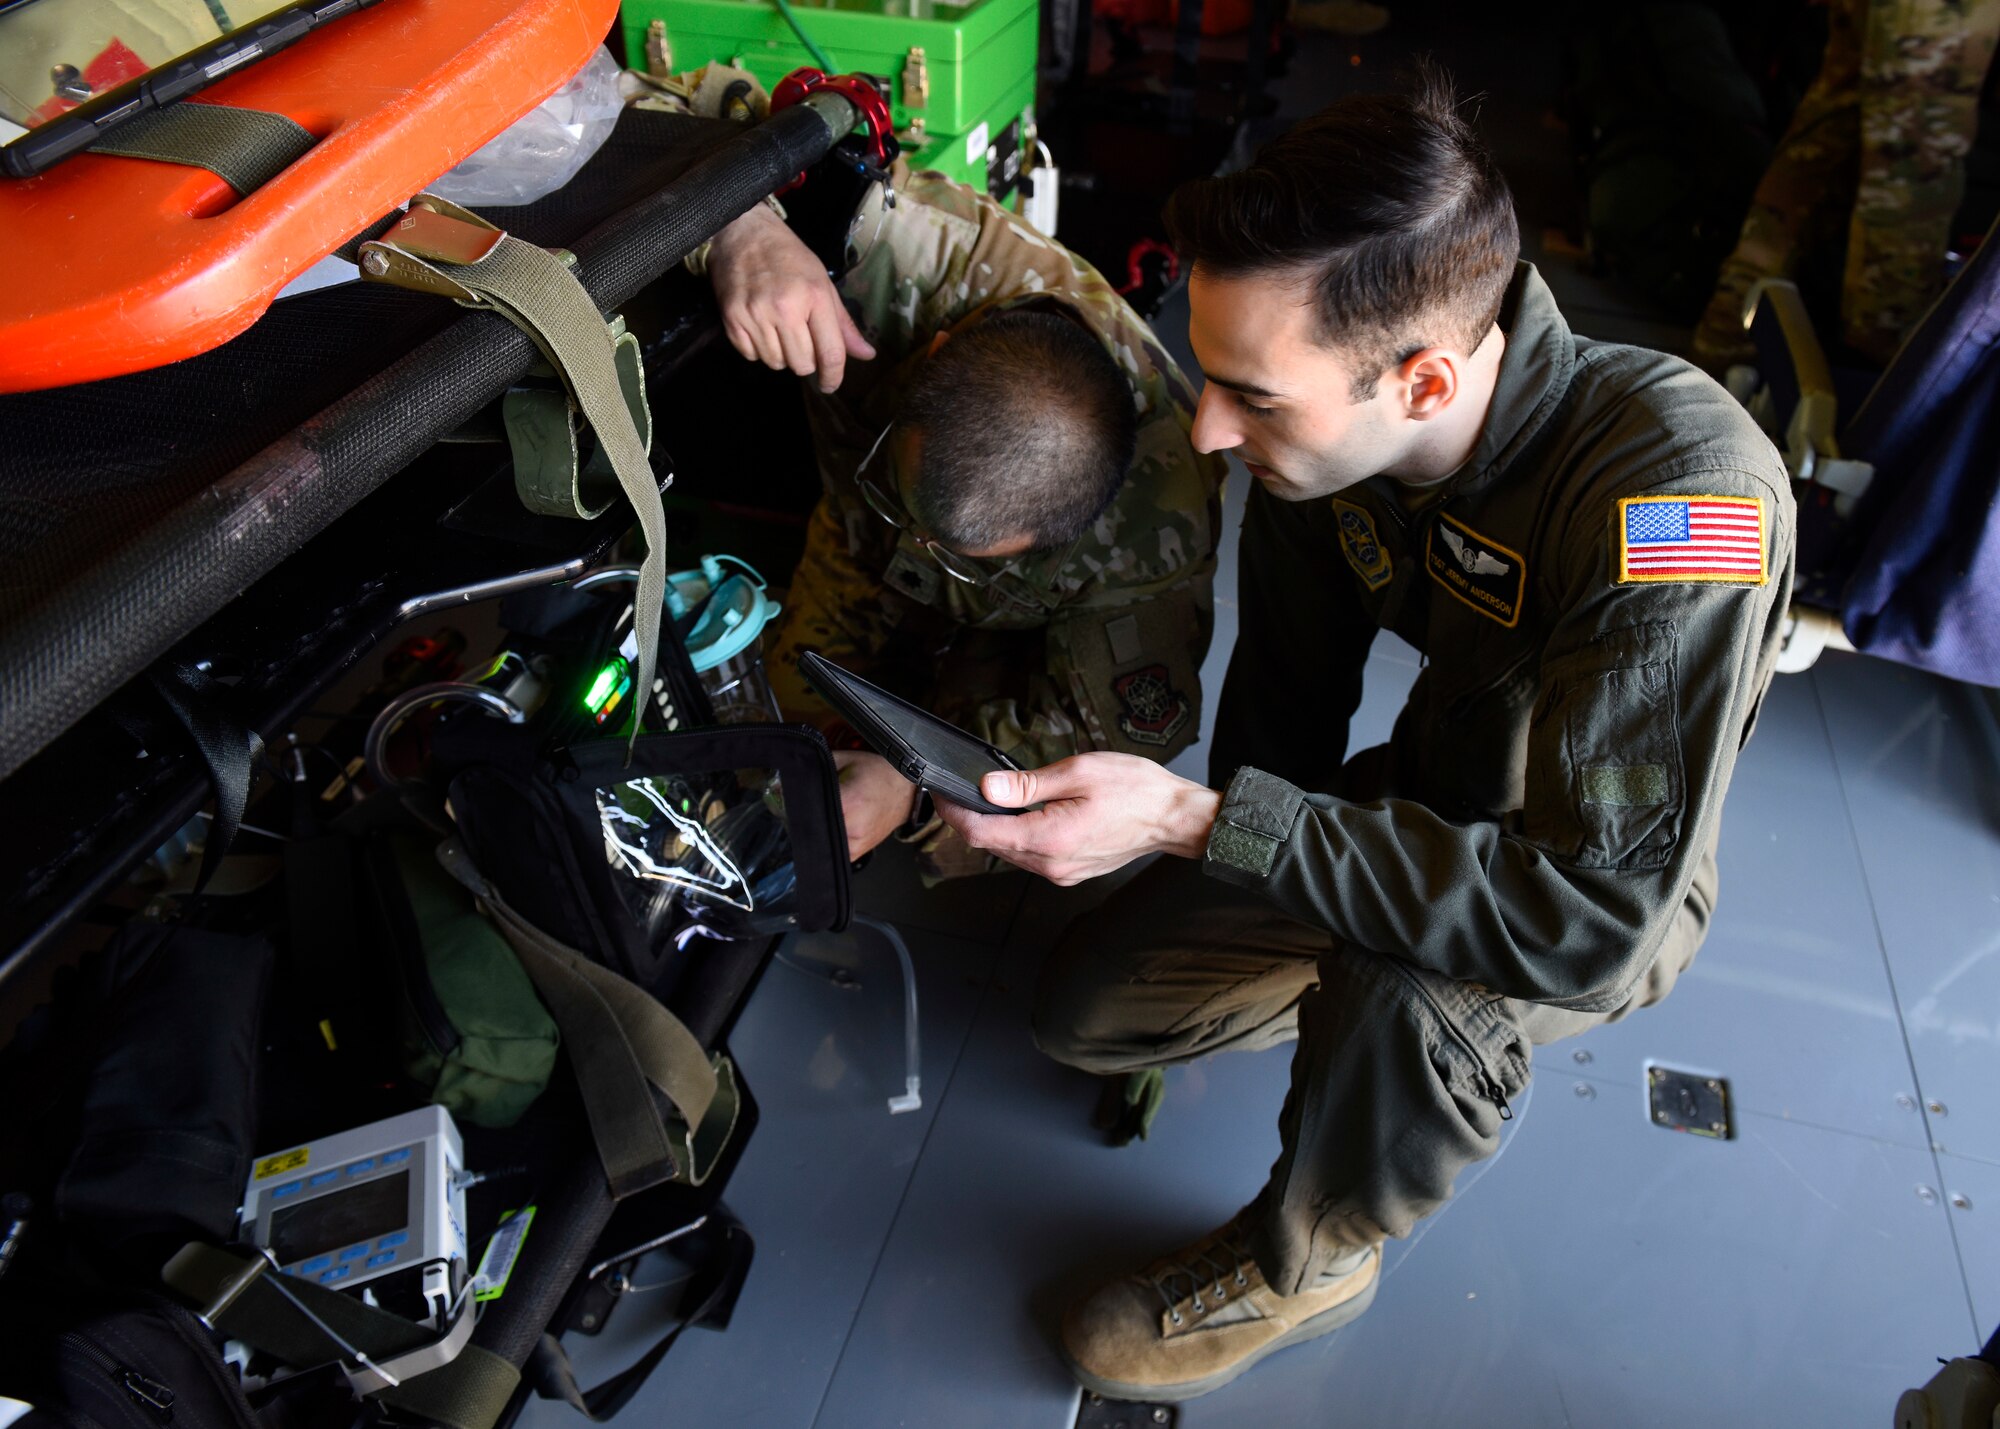 U.S. Air Force Lt. Col. David Hernandez (left), 43rd Aeromedical Evacuation Squadron chief flight nurse, and Tech. Sgt. Jeremey Anderson (right), 43rd AES aeromedical evacuation technician, prep medical equipment on a Fairchild Air Force Base KC-135 Stratotanker prior to an aeromedical evacuation mission at Travis Air Force Base, California, Feb. 11, 2020. The 43rd AES is currently transitioning from its present station at Pope Air Force Base to become part of the 60th AES at Travis Air Force Base, providing more training opportunities on the KC-10 Extender, C-5 Super Galaxy and C-17 Globemaster III based there, as well as KC-135s based out of Fairchild. (U.S. Air Force photo by Senior Airman Lawrence Sena)